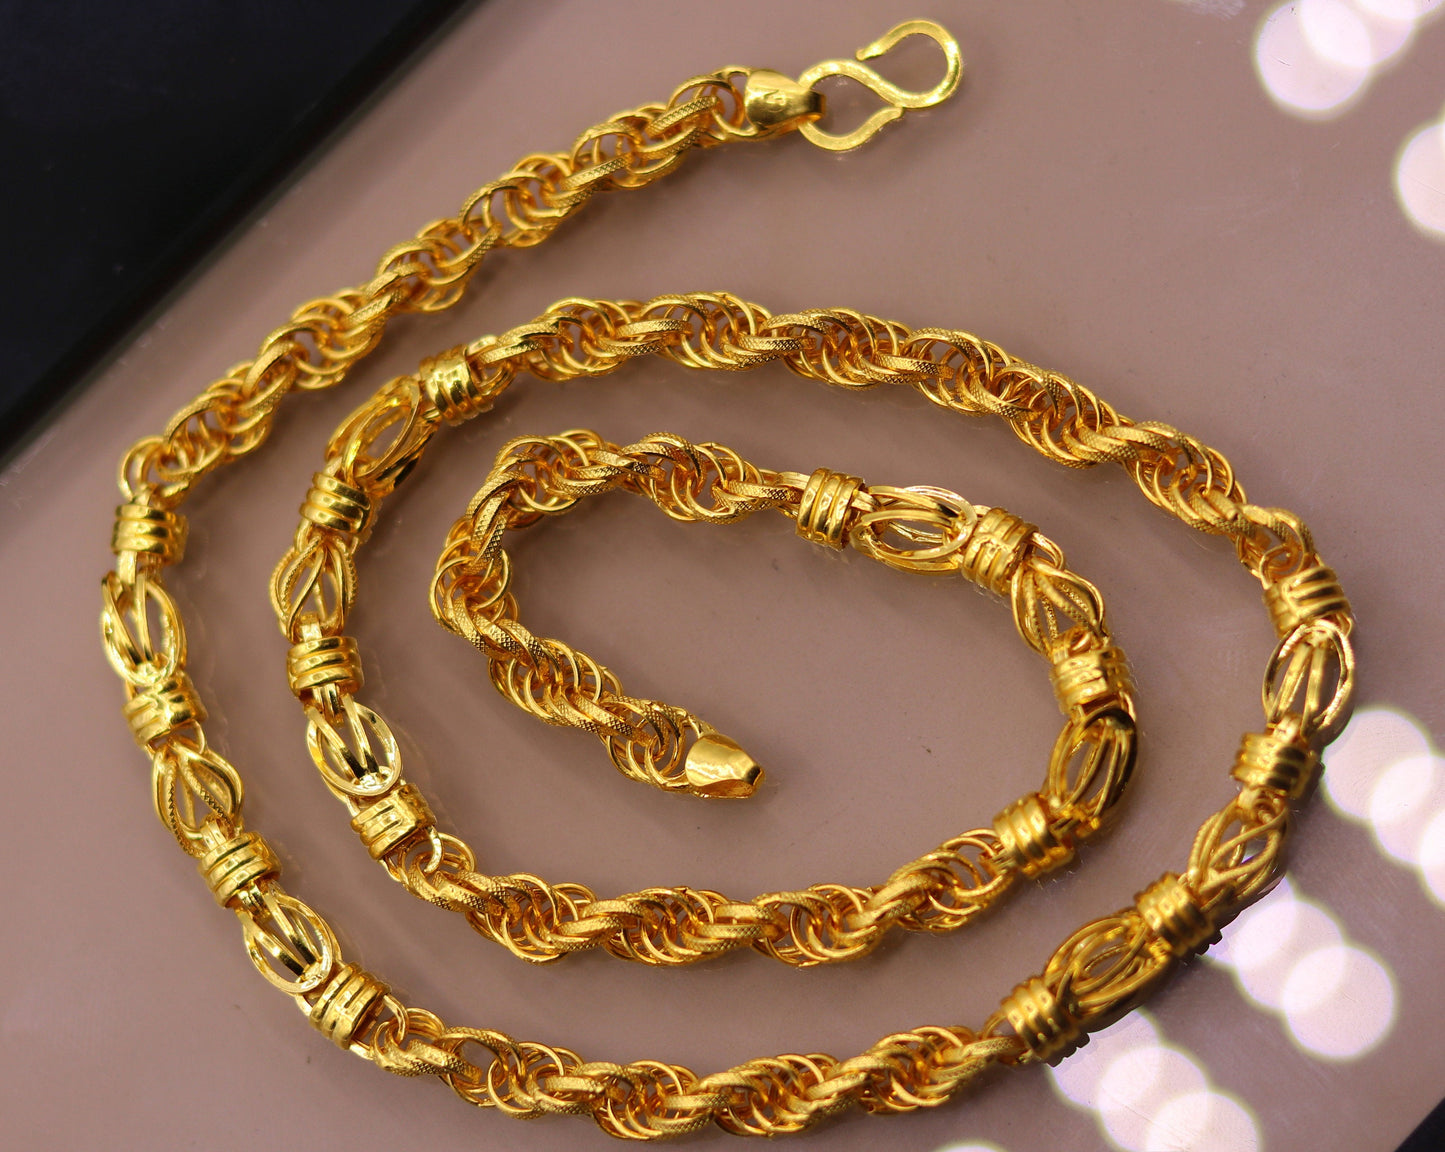 22k yellow gold handmade gorgeous customized design chain necklace genuine hallmarked unisex jewelry ch183 - TRIBAL ORNAMENTS